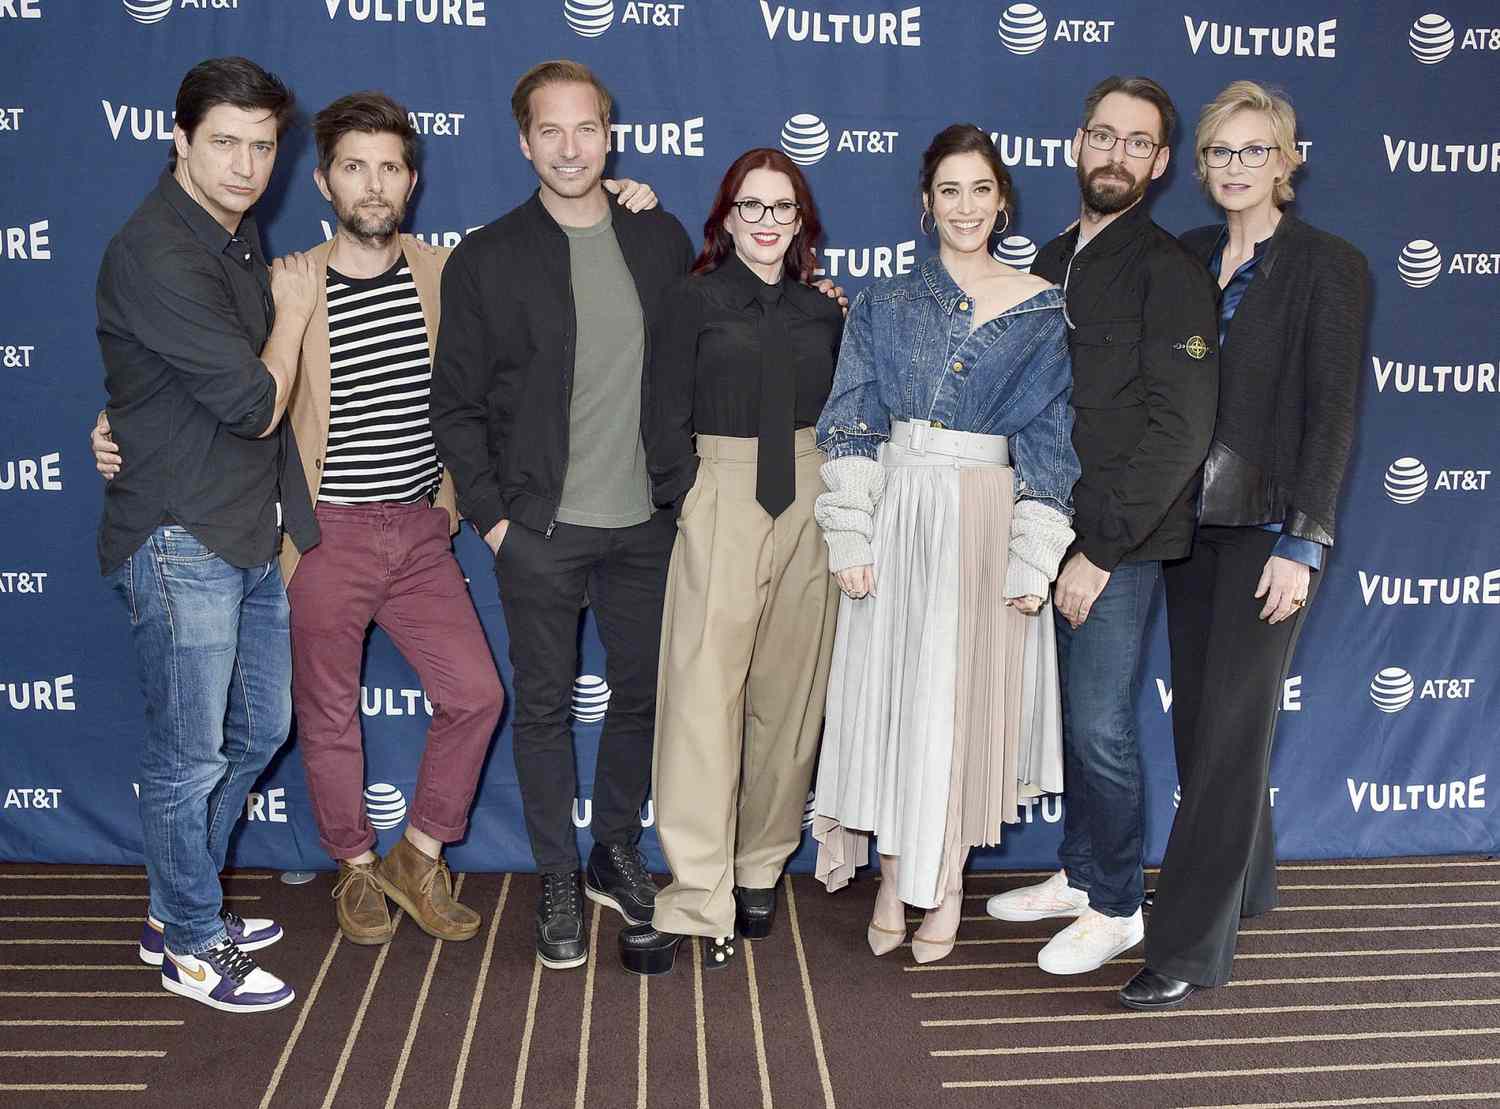 Vulture Festival Los Angeles 2019 - Day 2